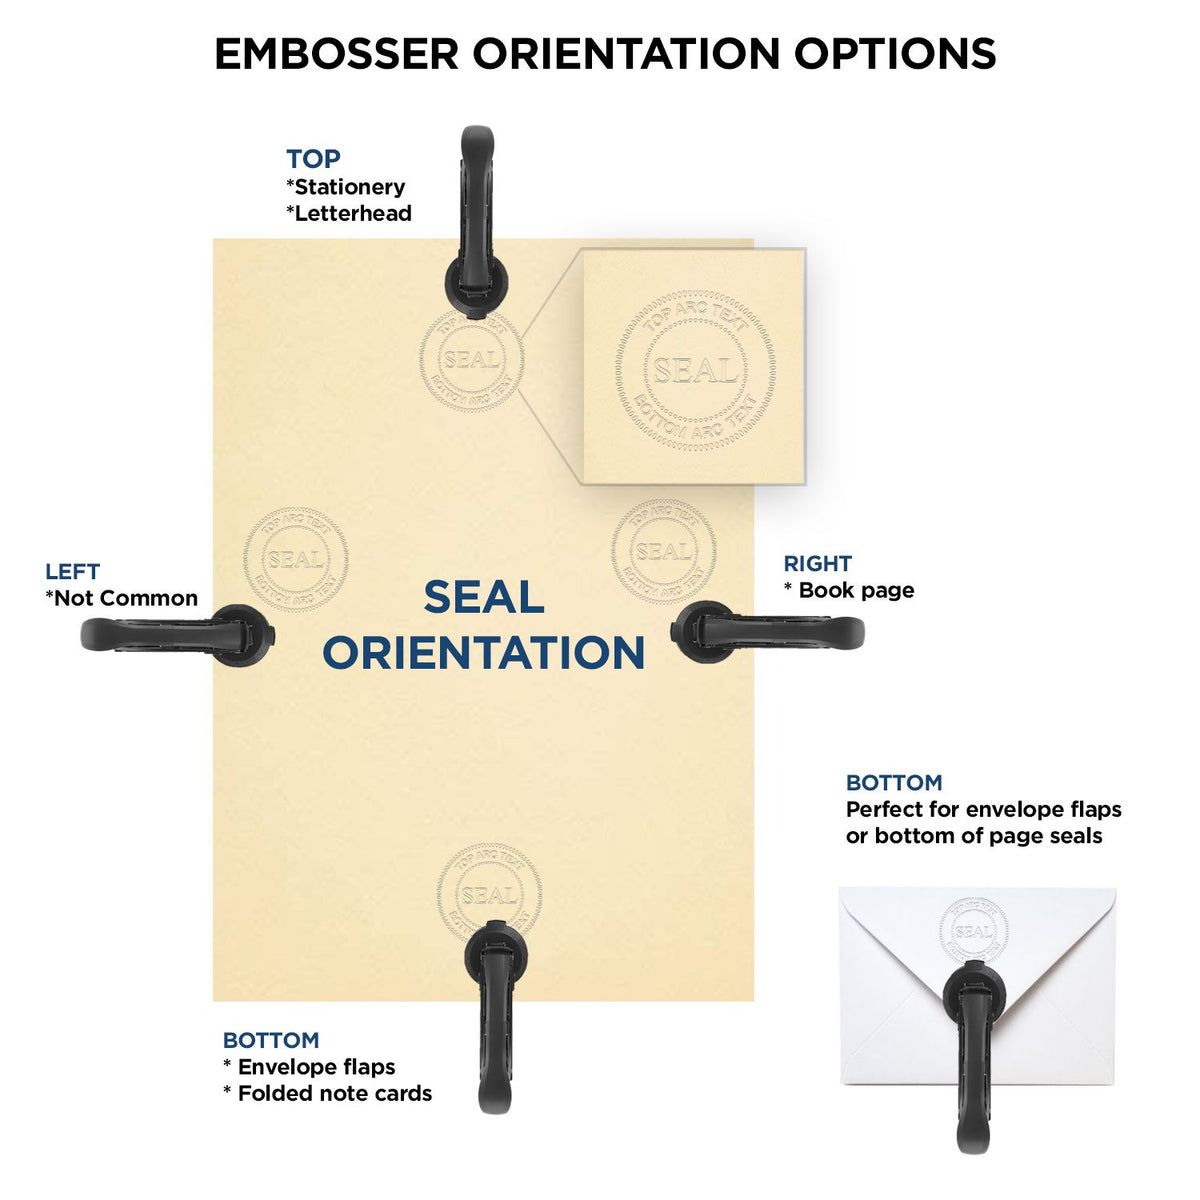 An infographic for the Gift Minnesota Land Surveyor Seal showing embosser orientation, this is showing examples of a top, bottom, right and left insert.